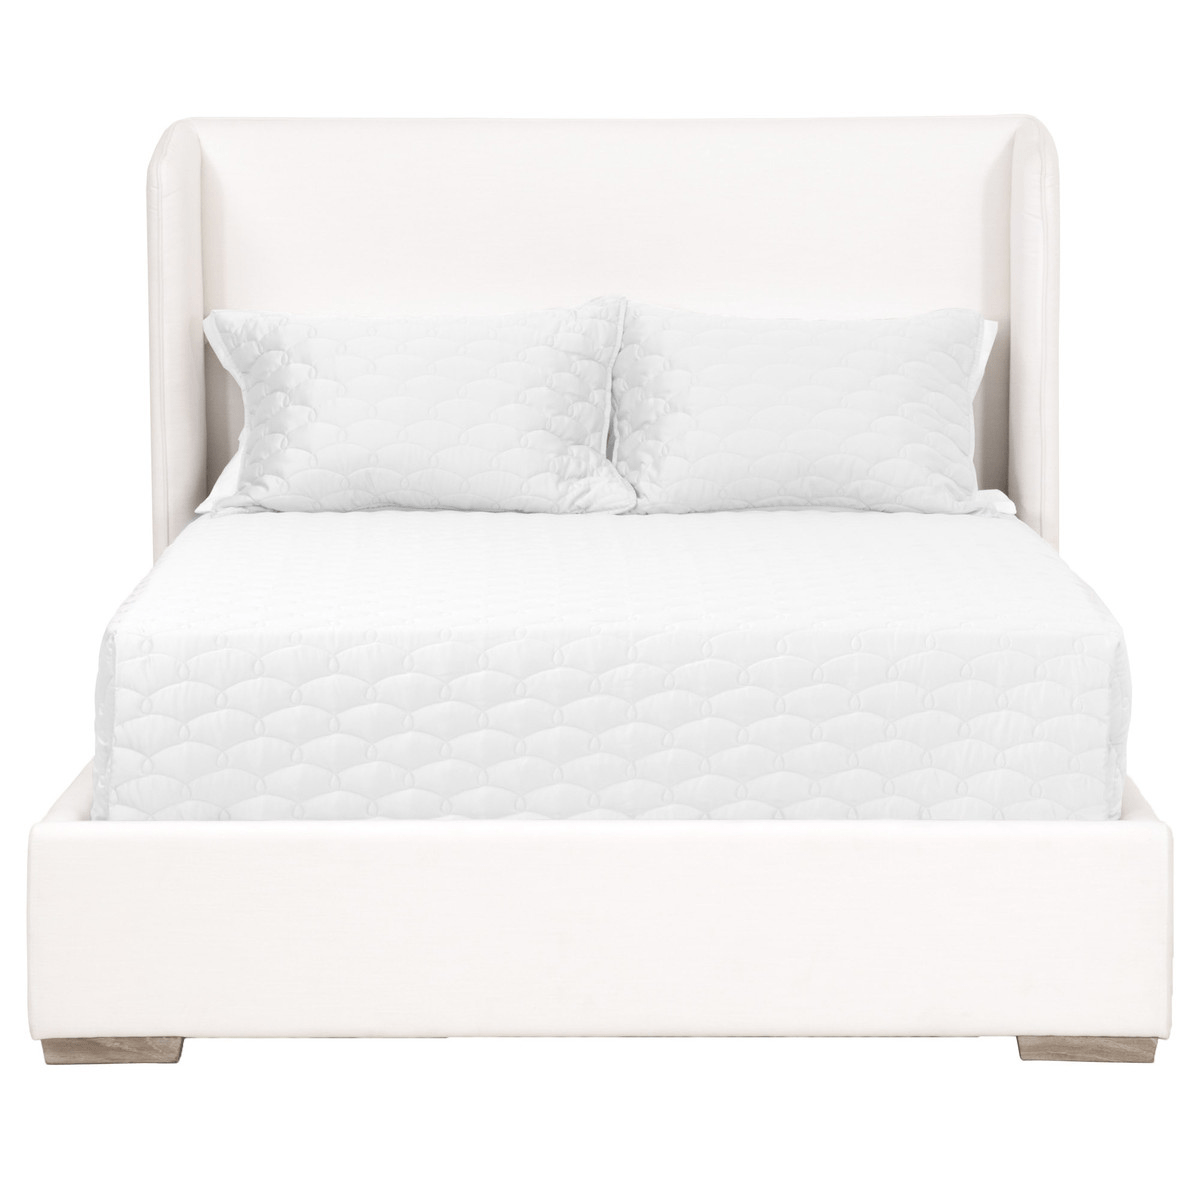 Stewart Bed Bed 7126-3.LPPRL/NG 842279114237